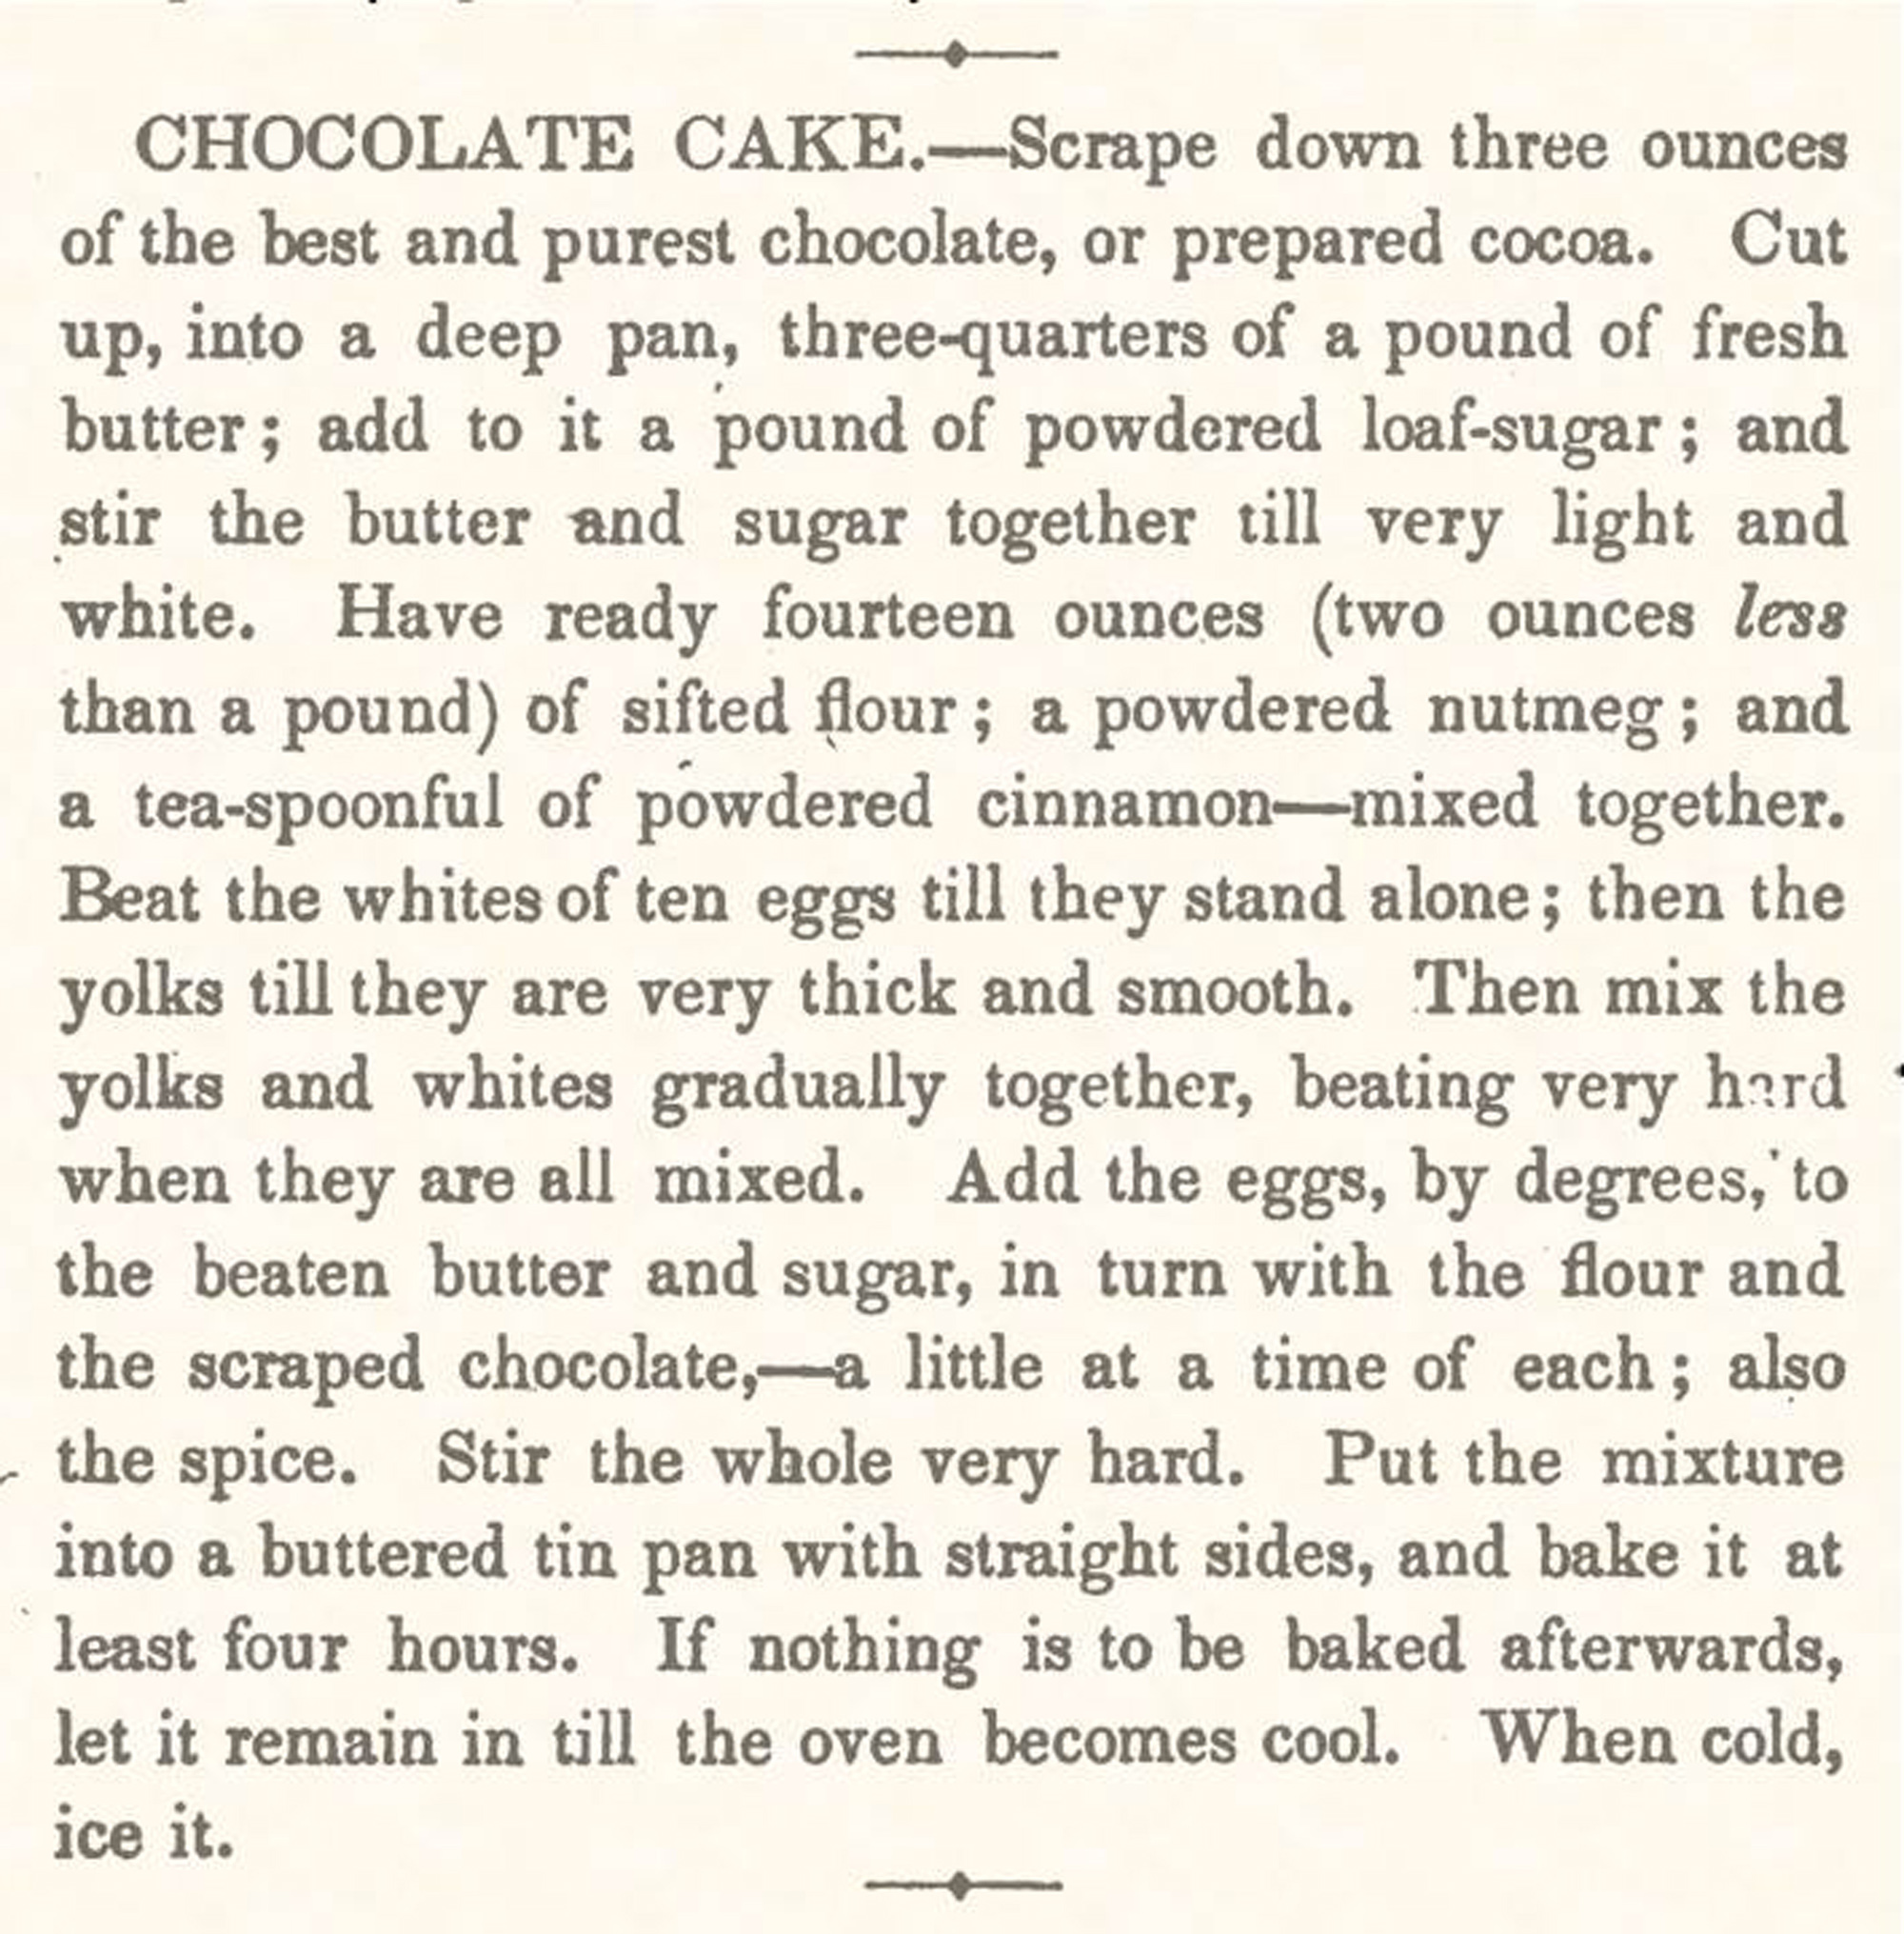 Chocolate cake recipe in The Lady’s Receipt Book by Eliza Leslie. 